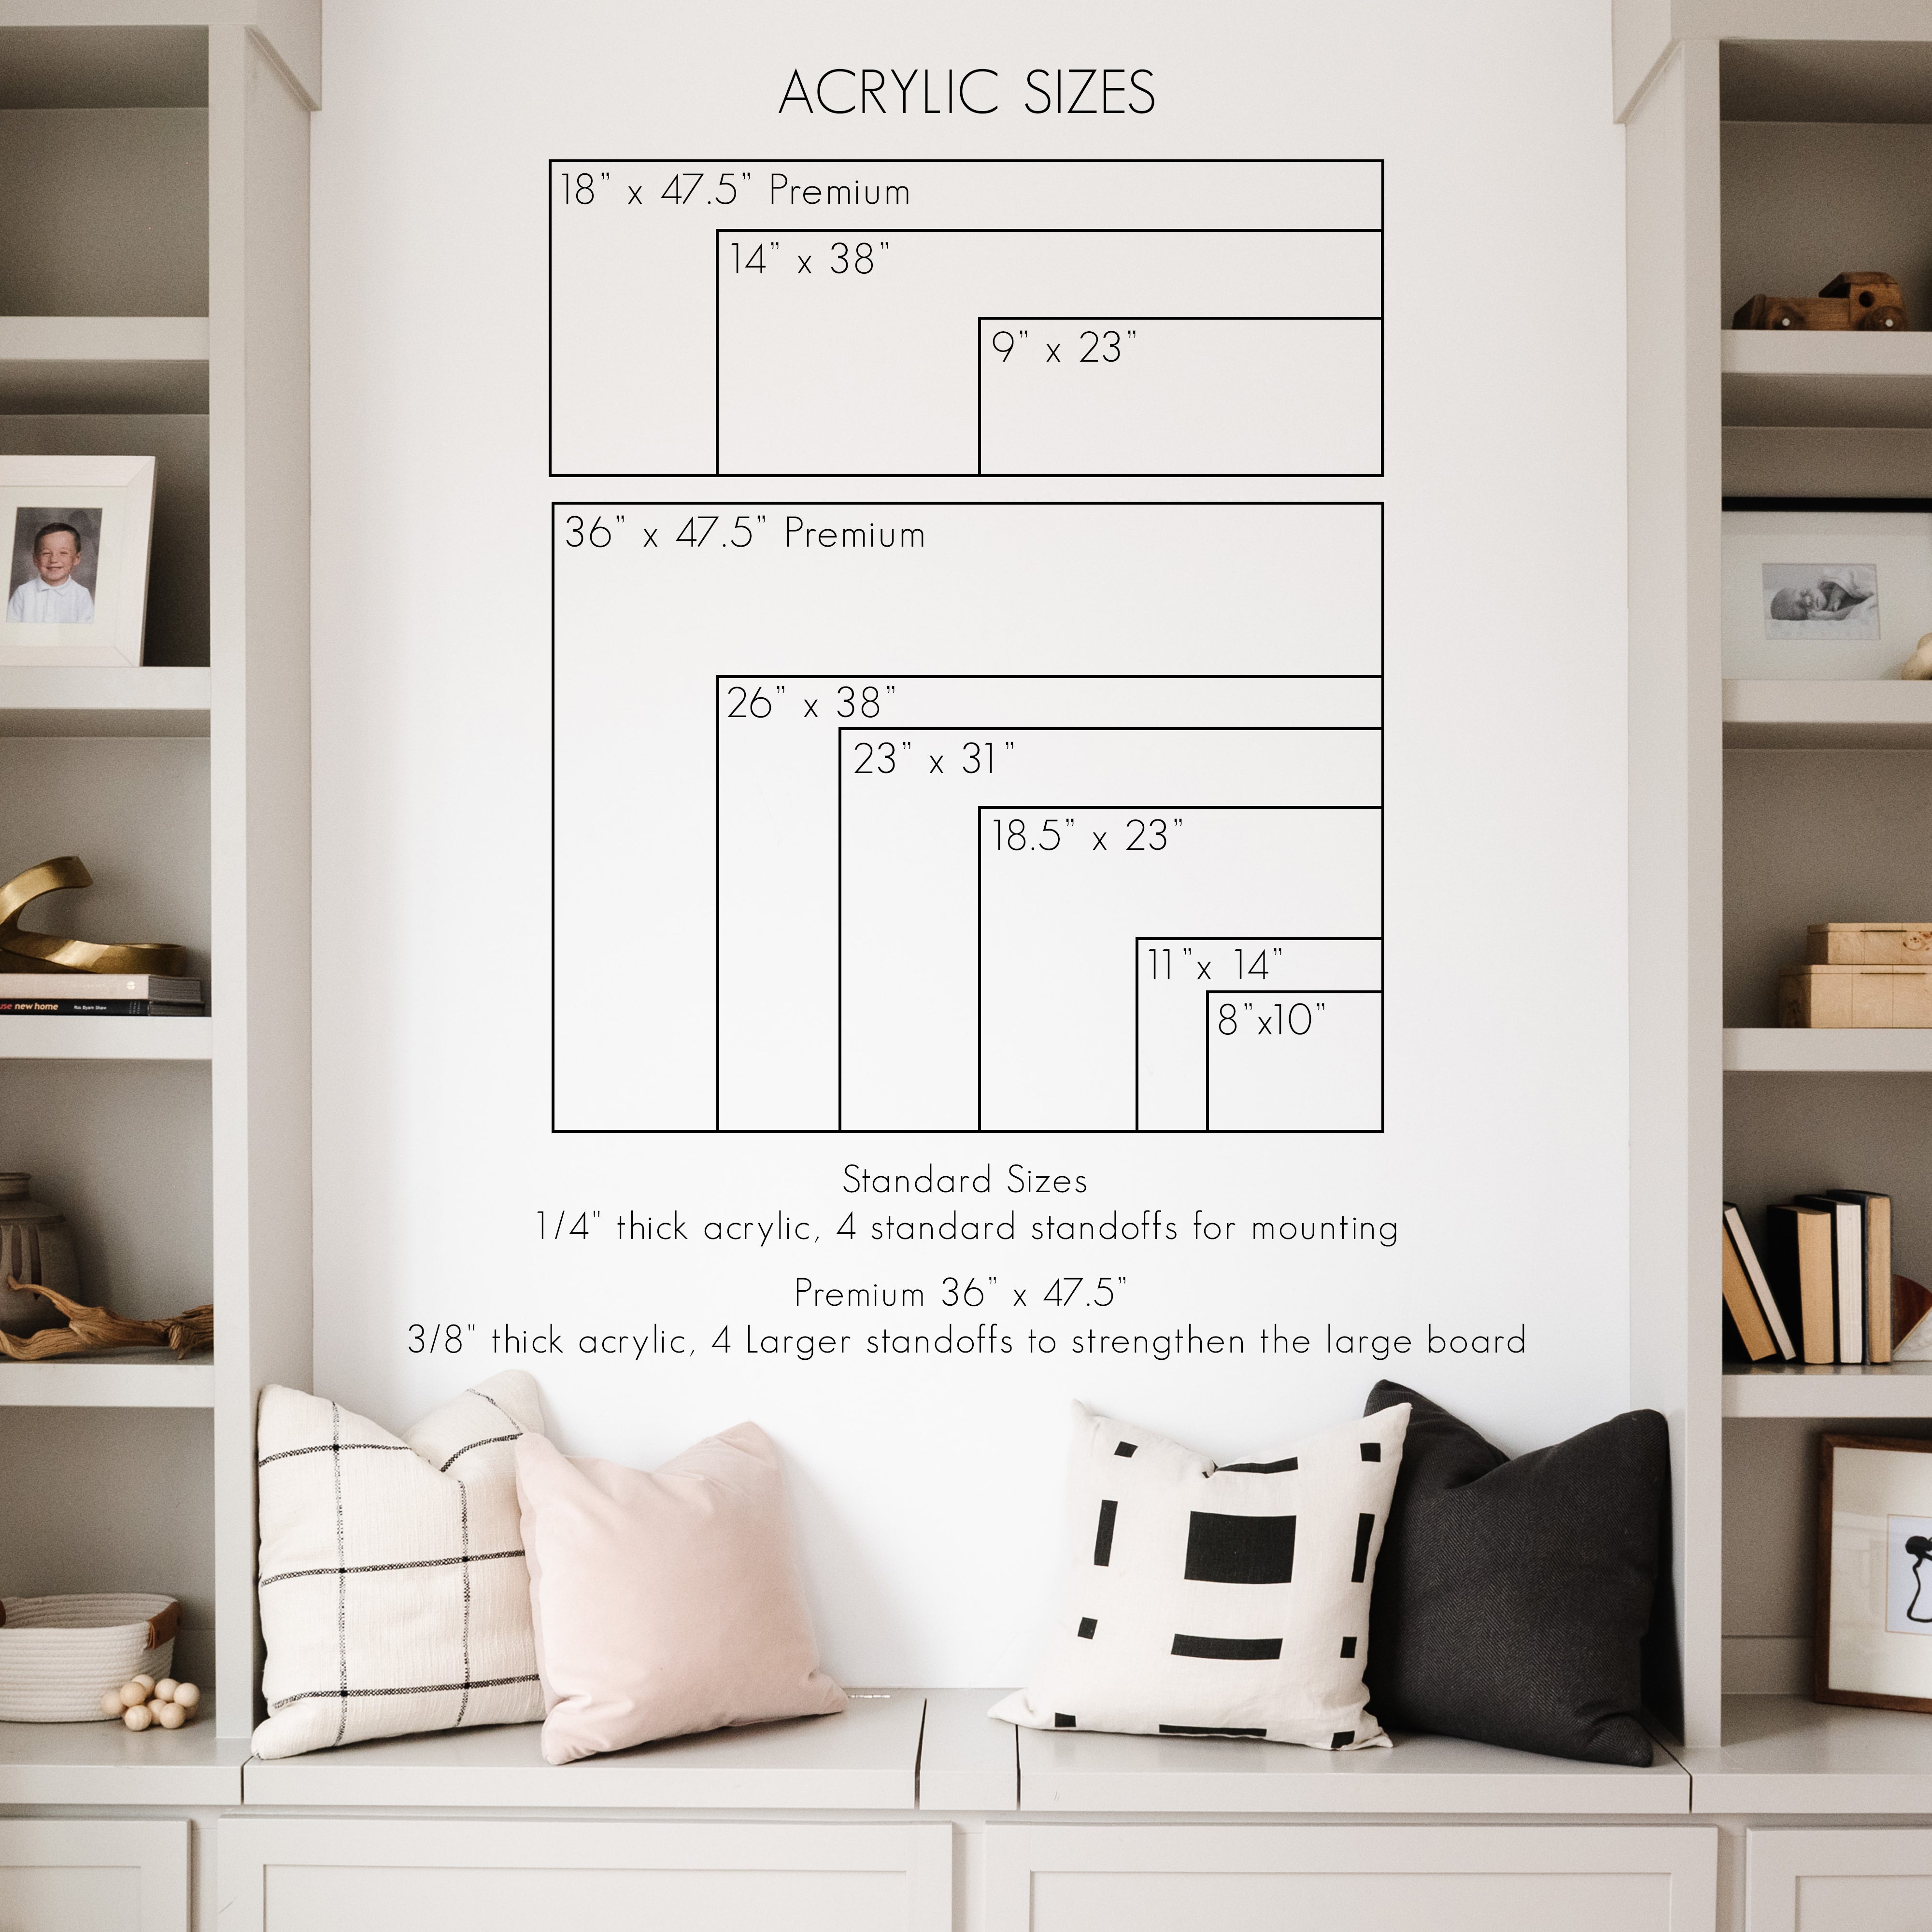 Monthly Frosted Acrylic Calendar + 1 Section | Horizontal Craig